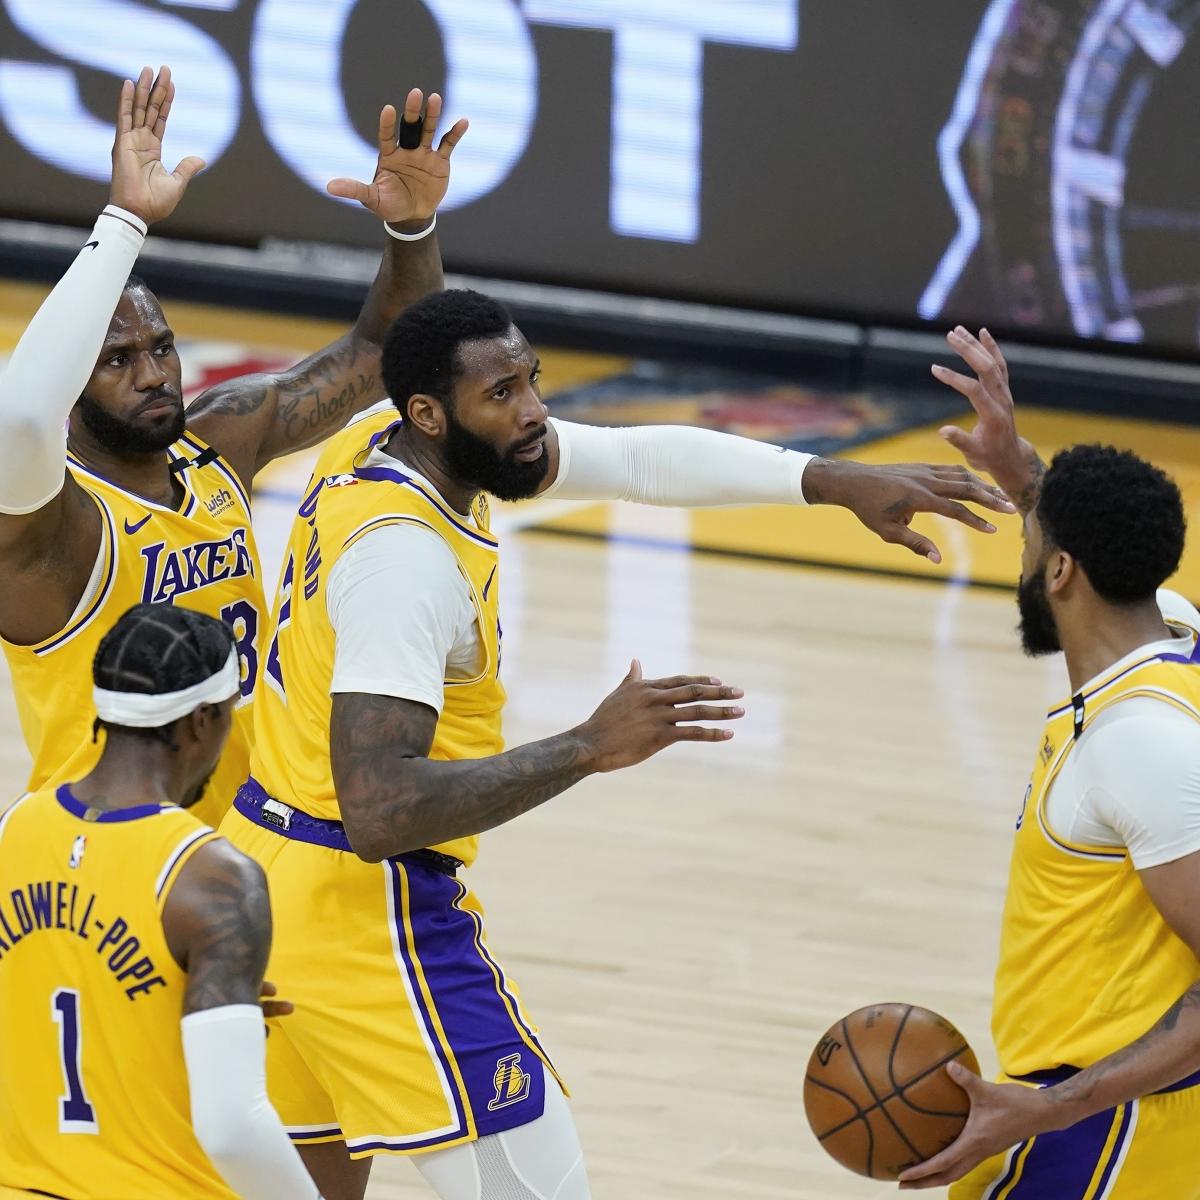 Lakers Snap Judgments on 2021 Playoff Destiny After Game 2 vs. Suns